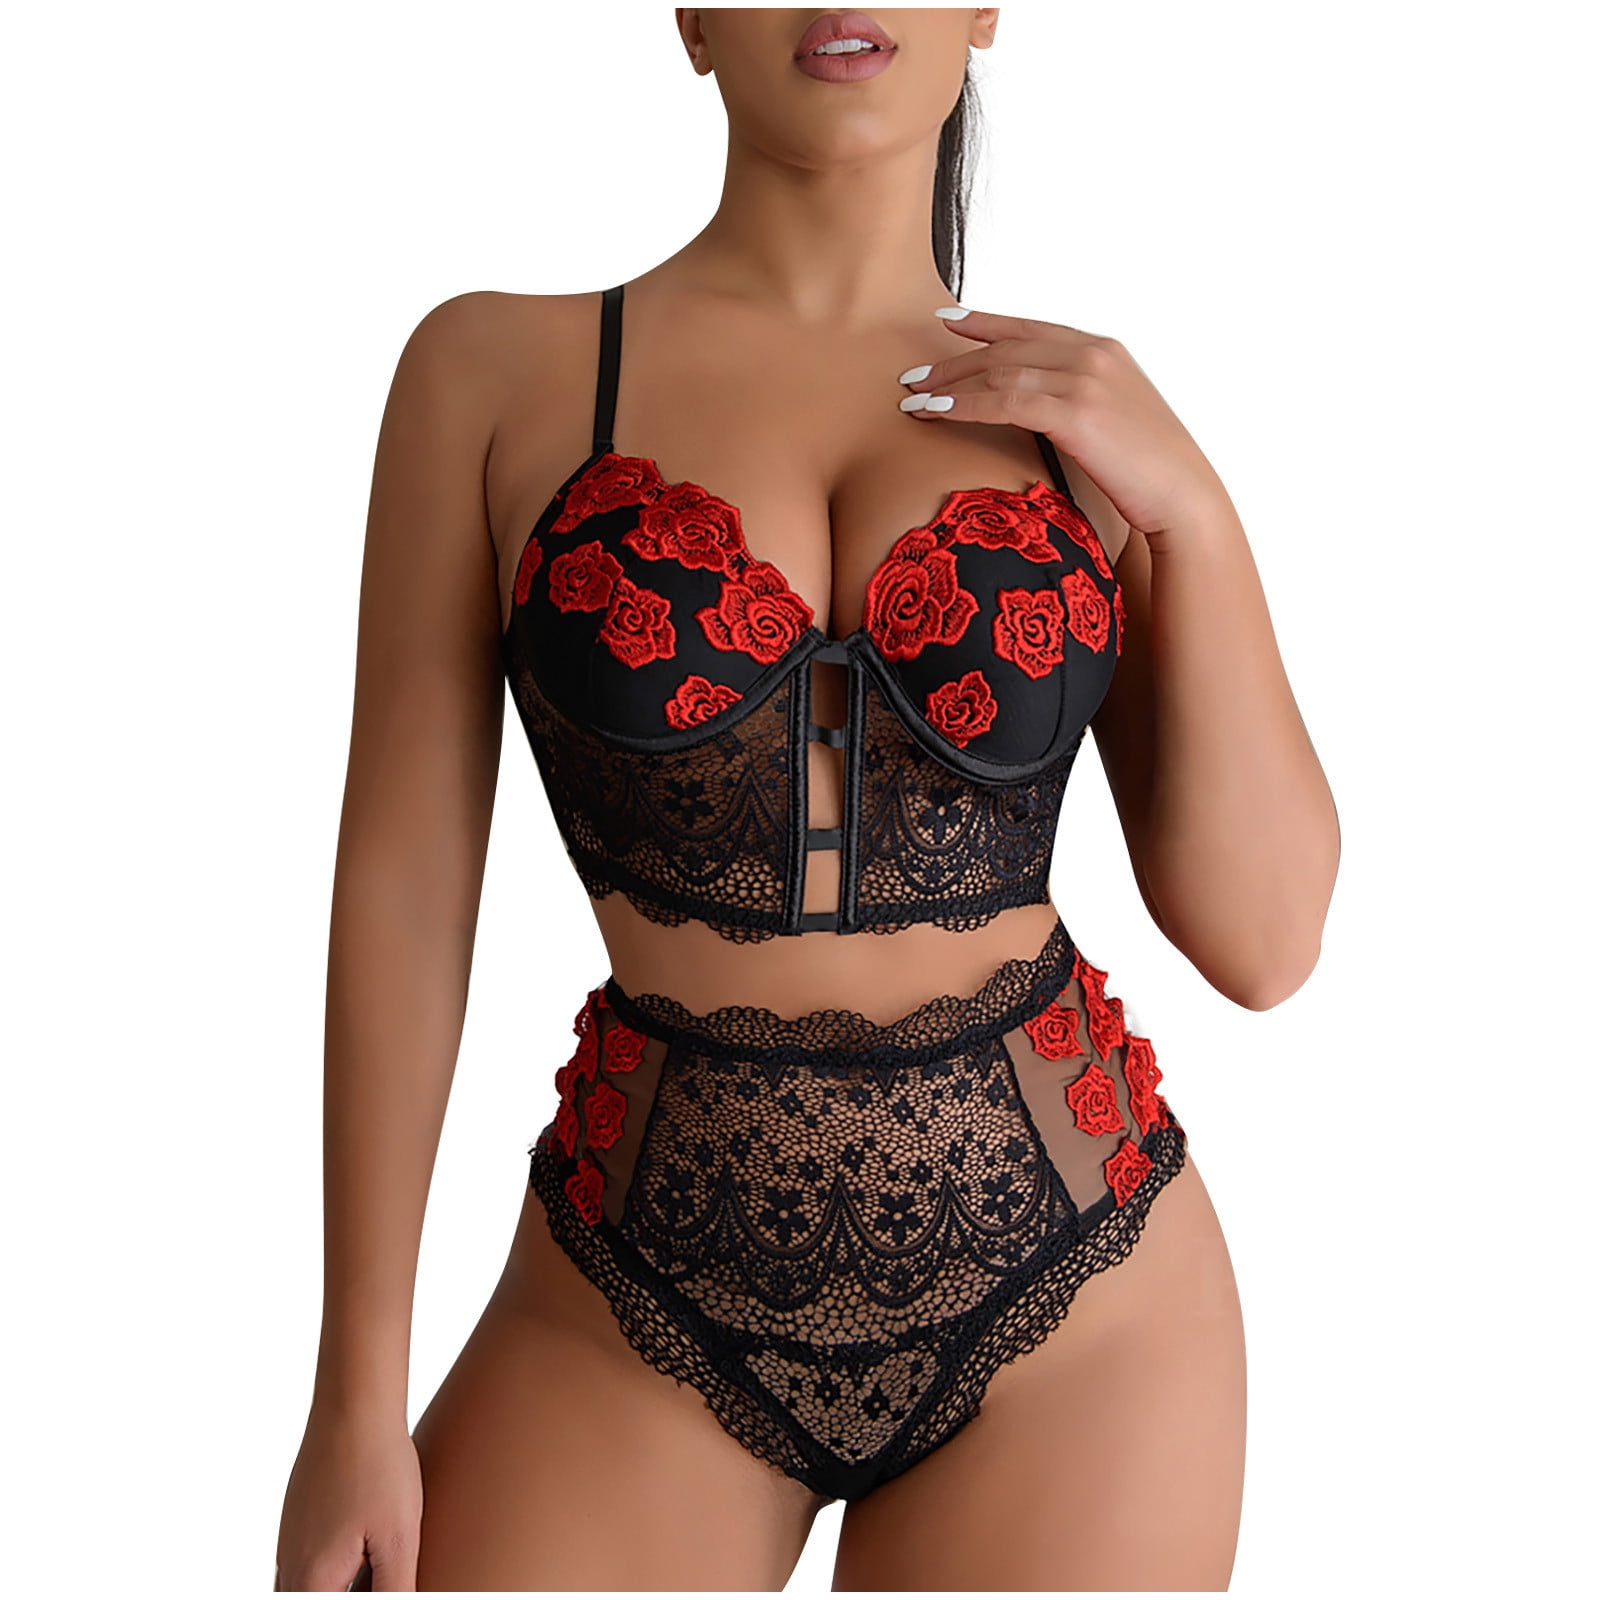 OAVQHLG3B Embroidery Womens Lingerie Bra Sets Sexy Lace